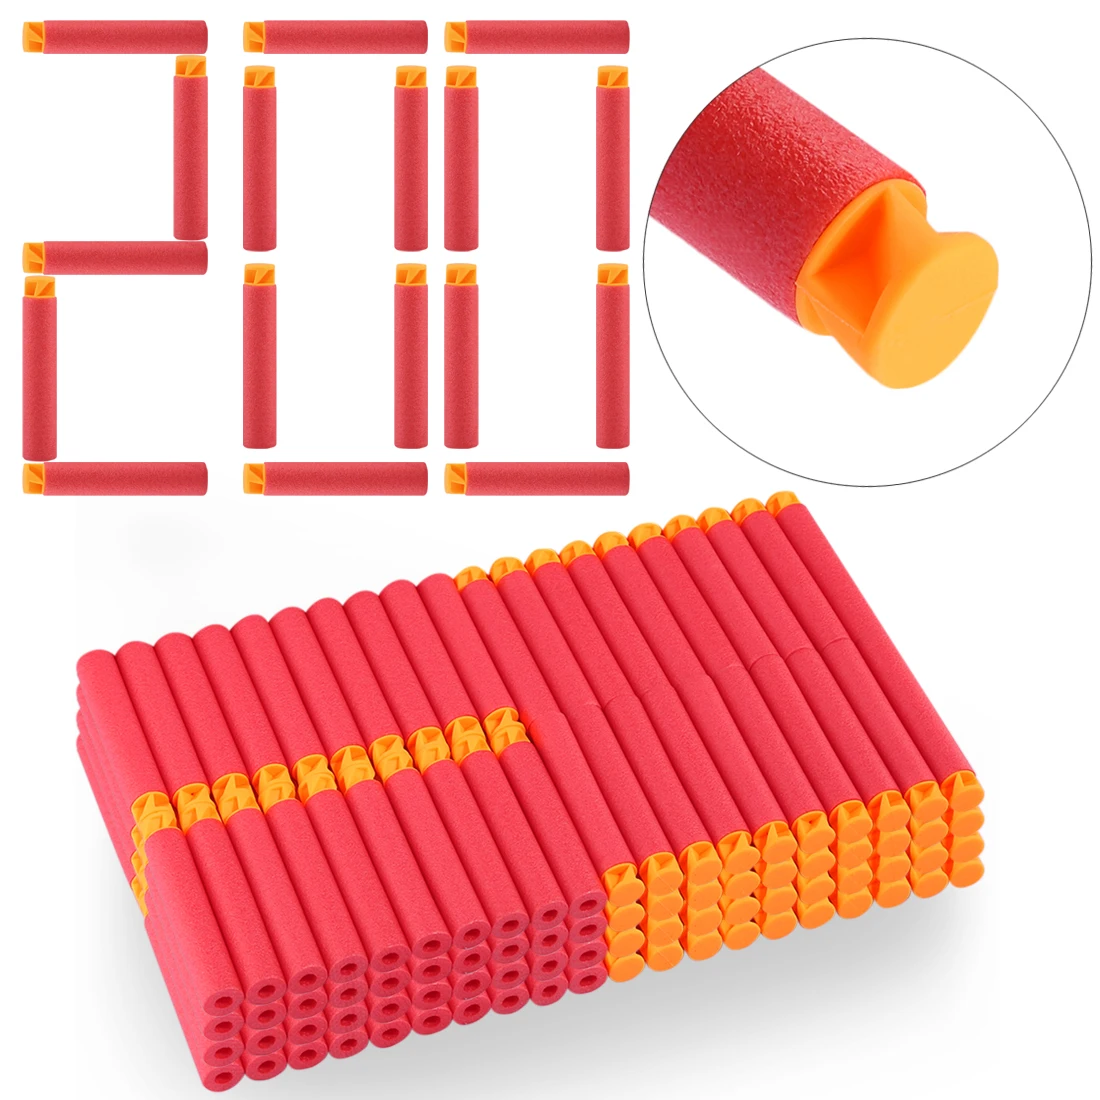 

200PCS For Nerf Bullets Soft Flat Head 7.2cm Refill Darts Toy Bullets for Nerf Series Blasters Kid Children Christmas Gifts